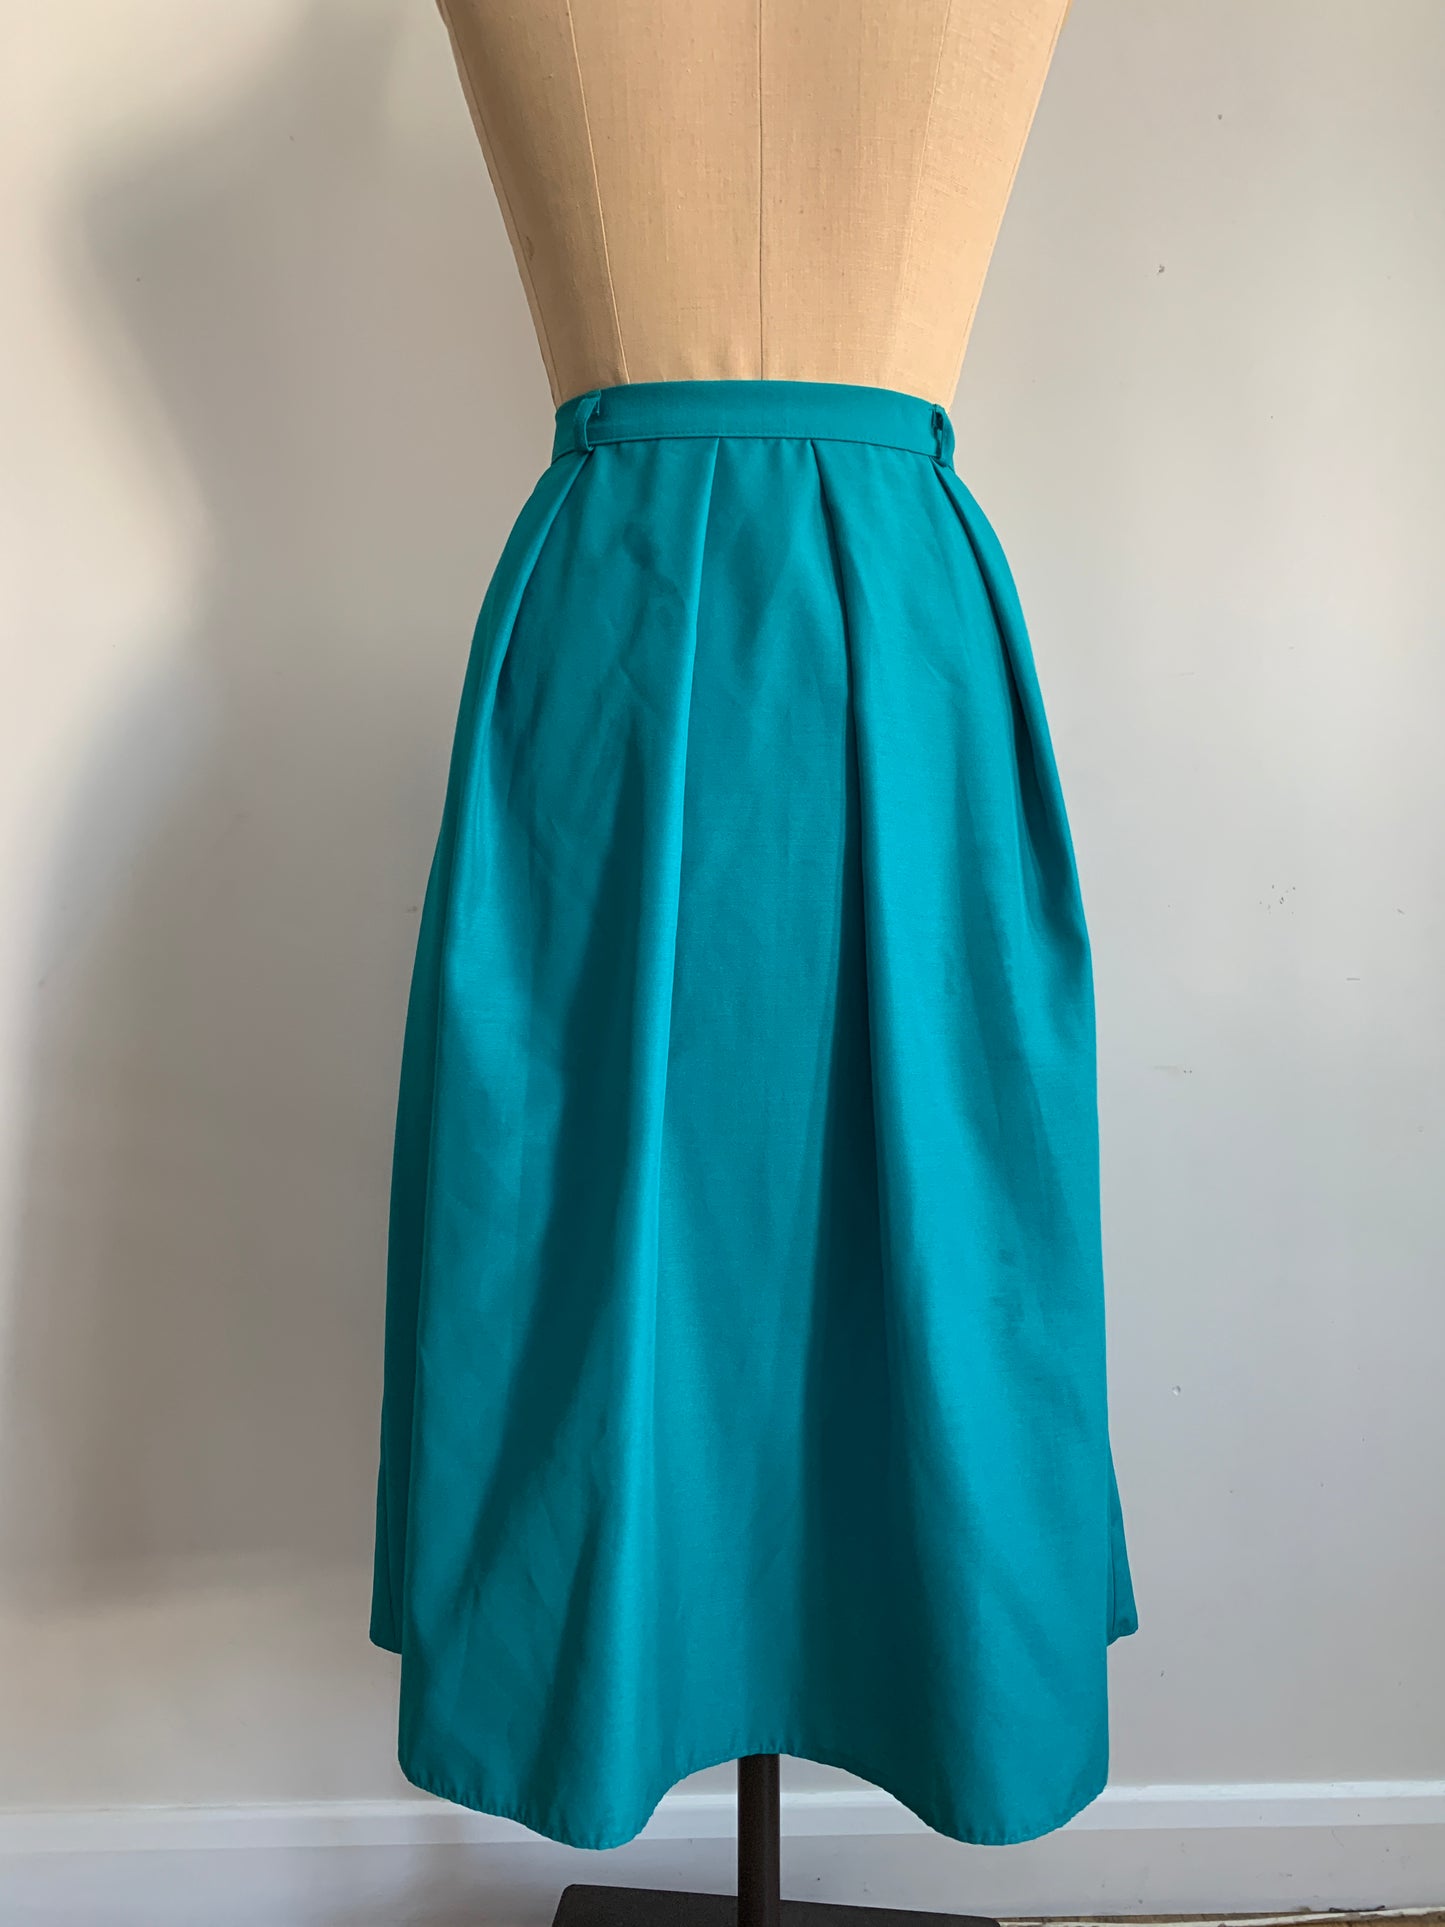 Late 80’s/early 90’s vintage St Michael’s turquoise button down full skirt